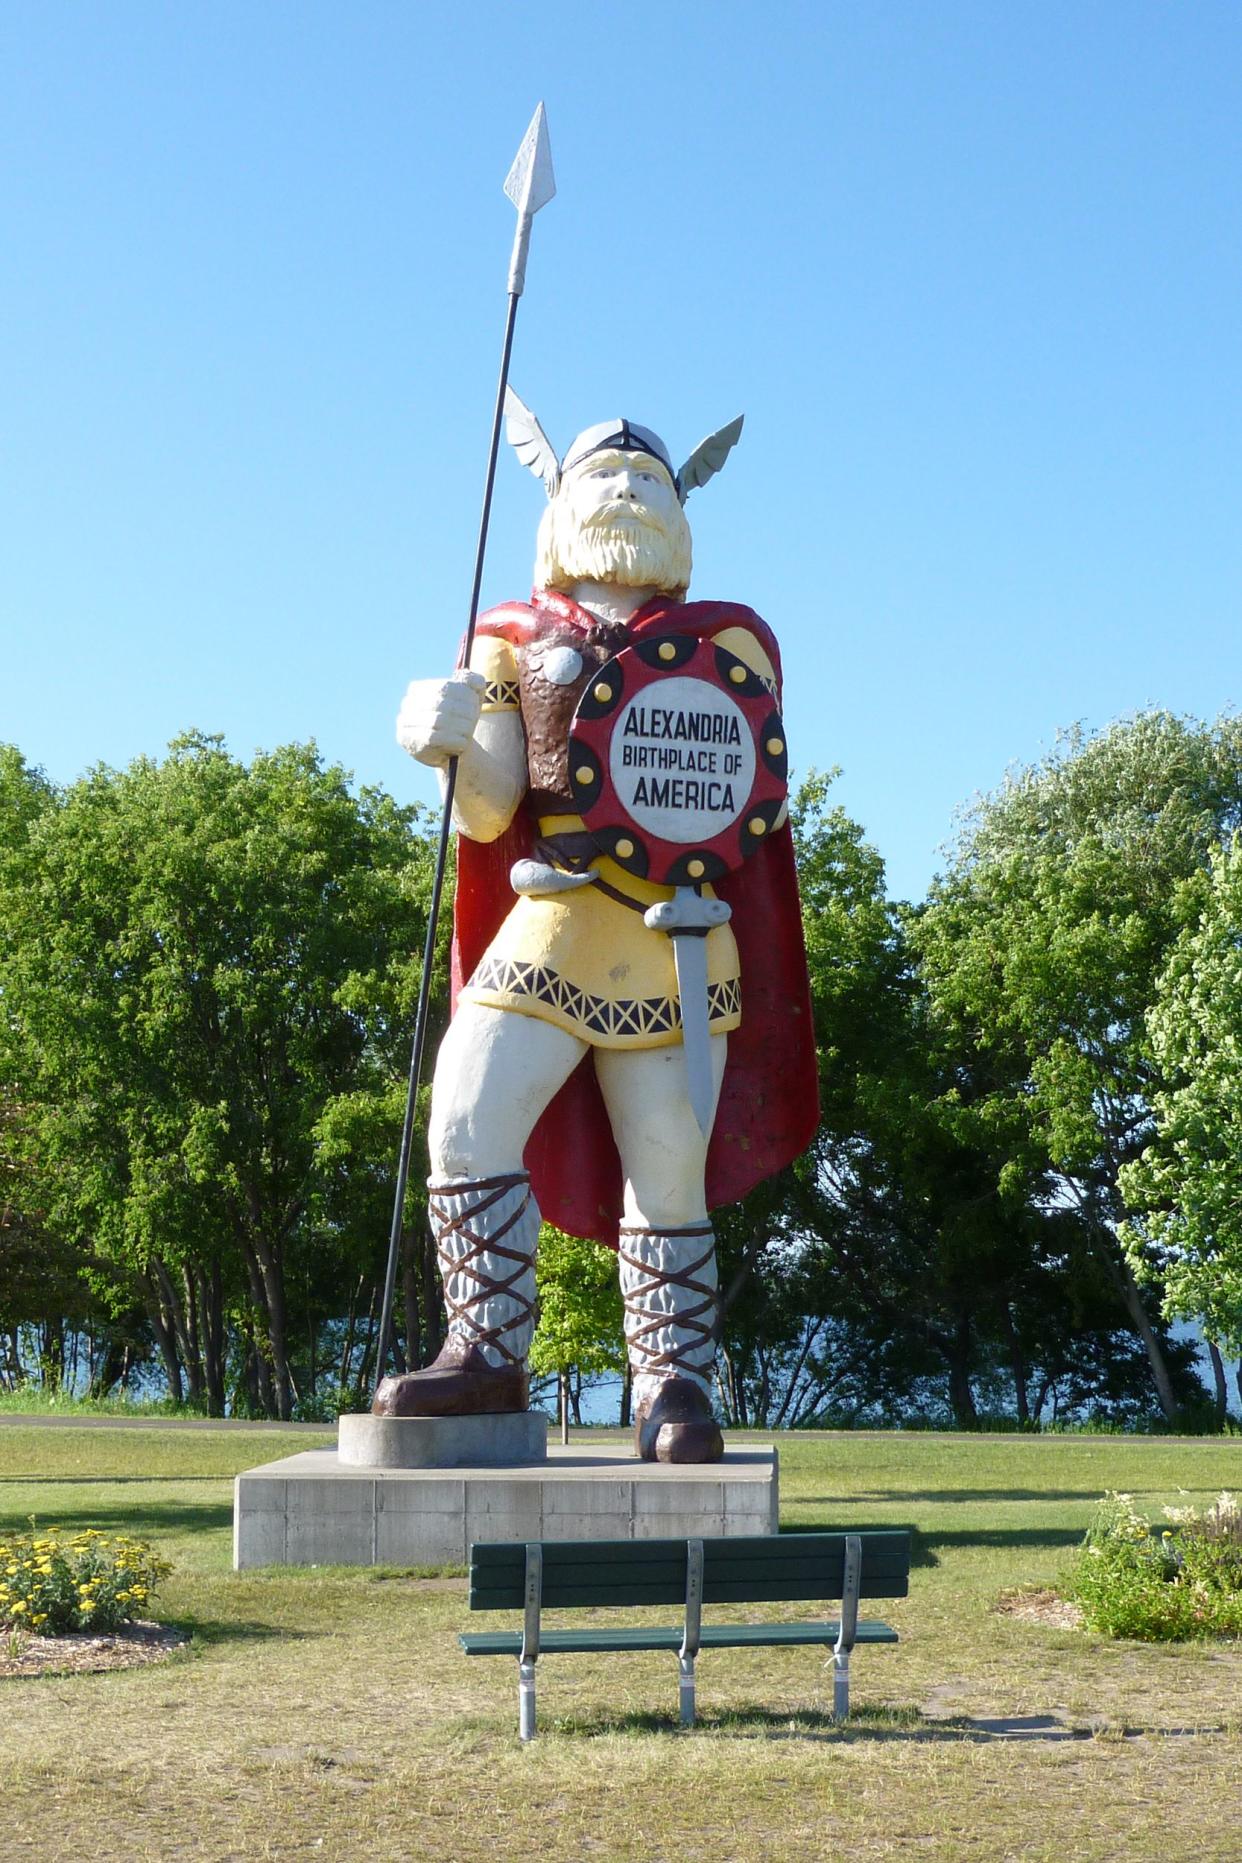 Statue of Big Ole the Viking, greeting visitors to Alexandria